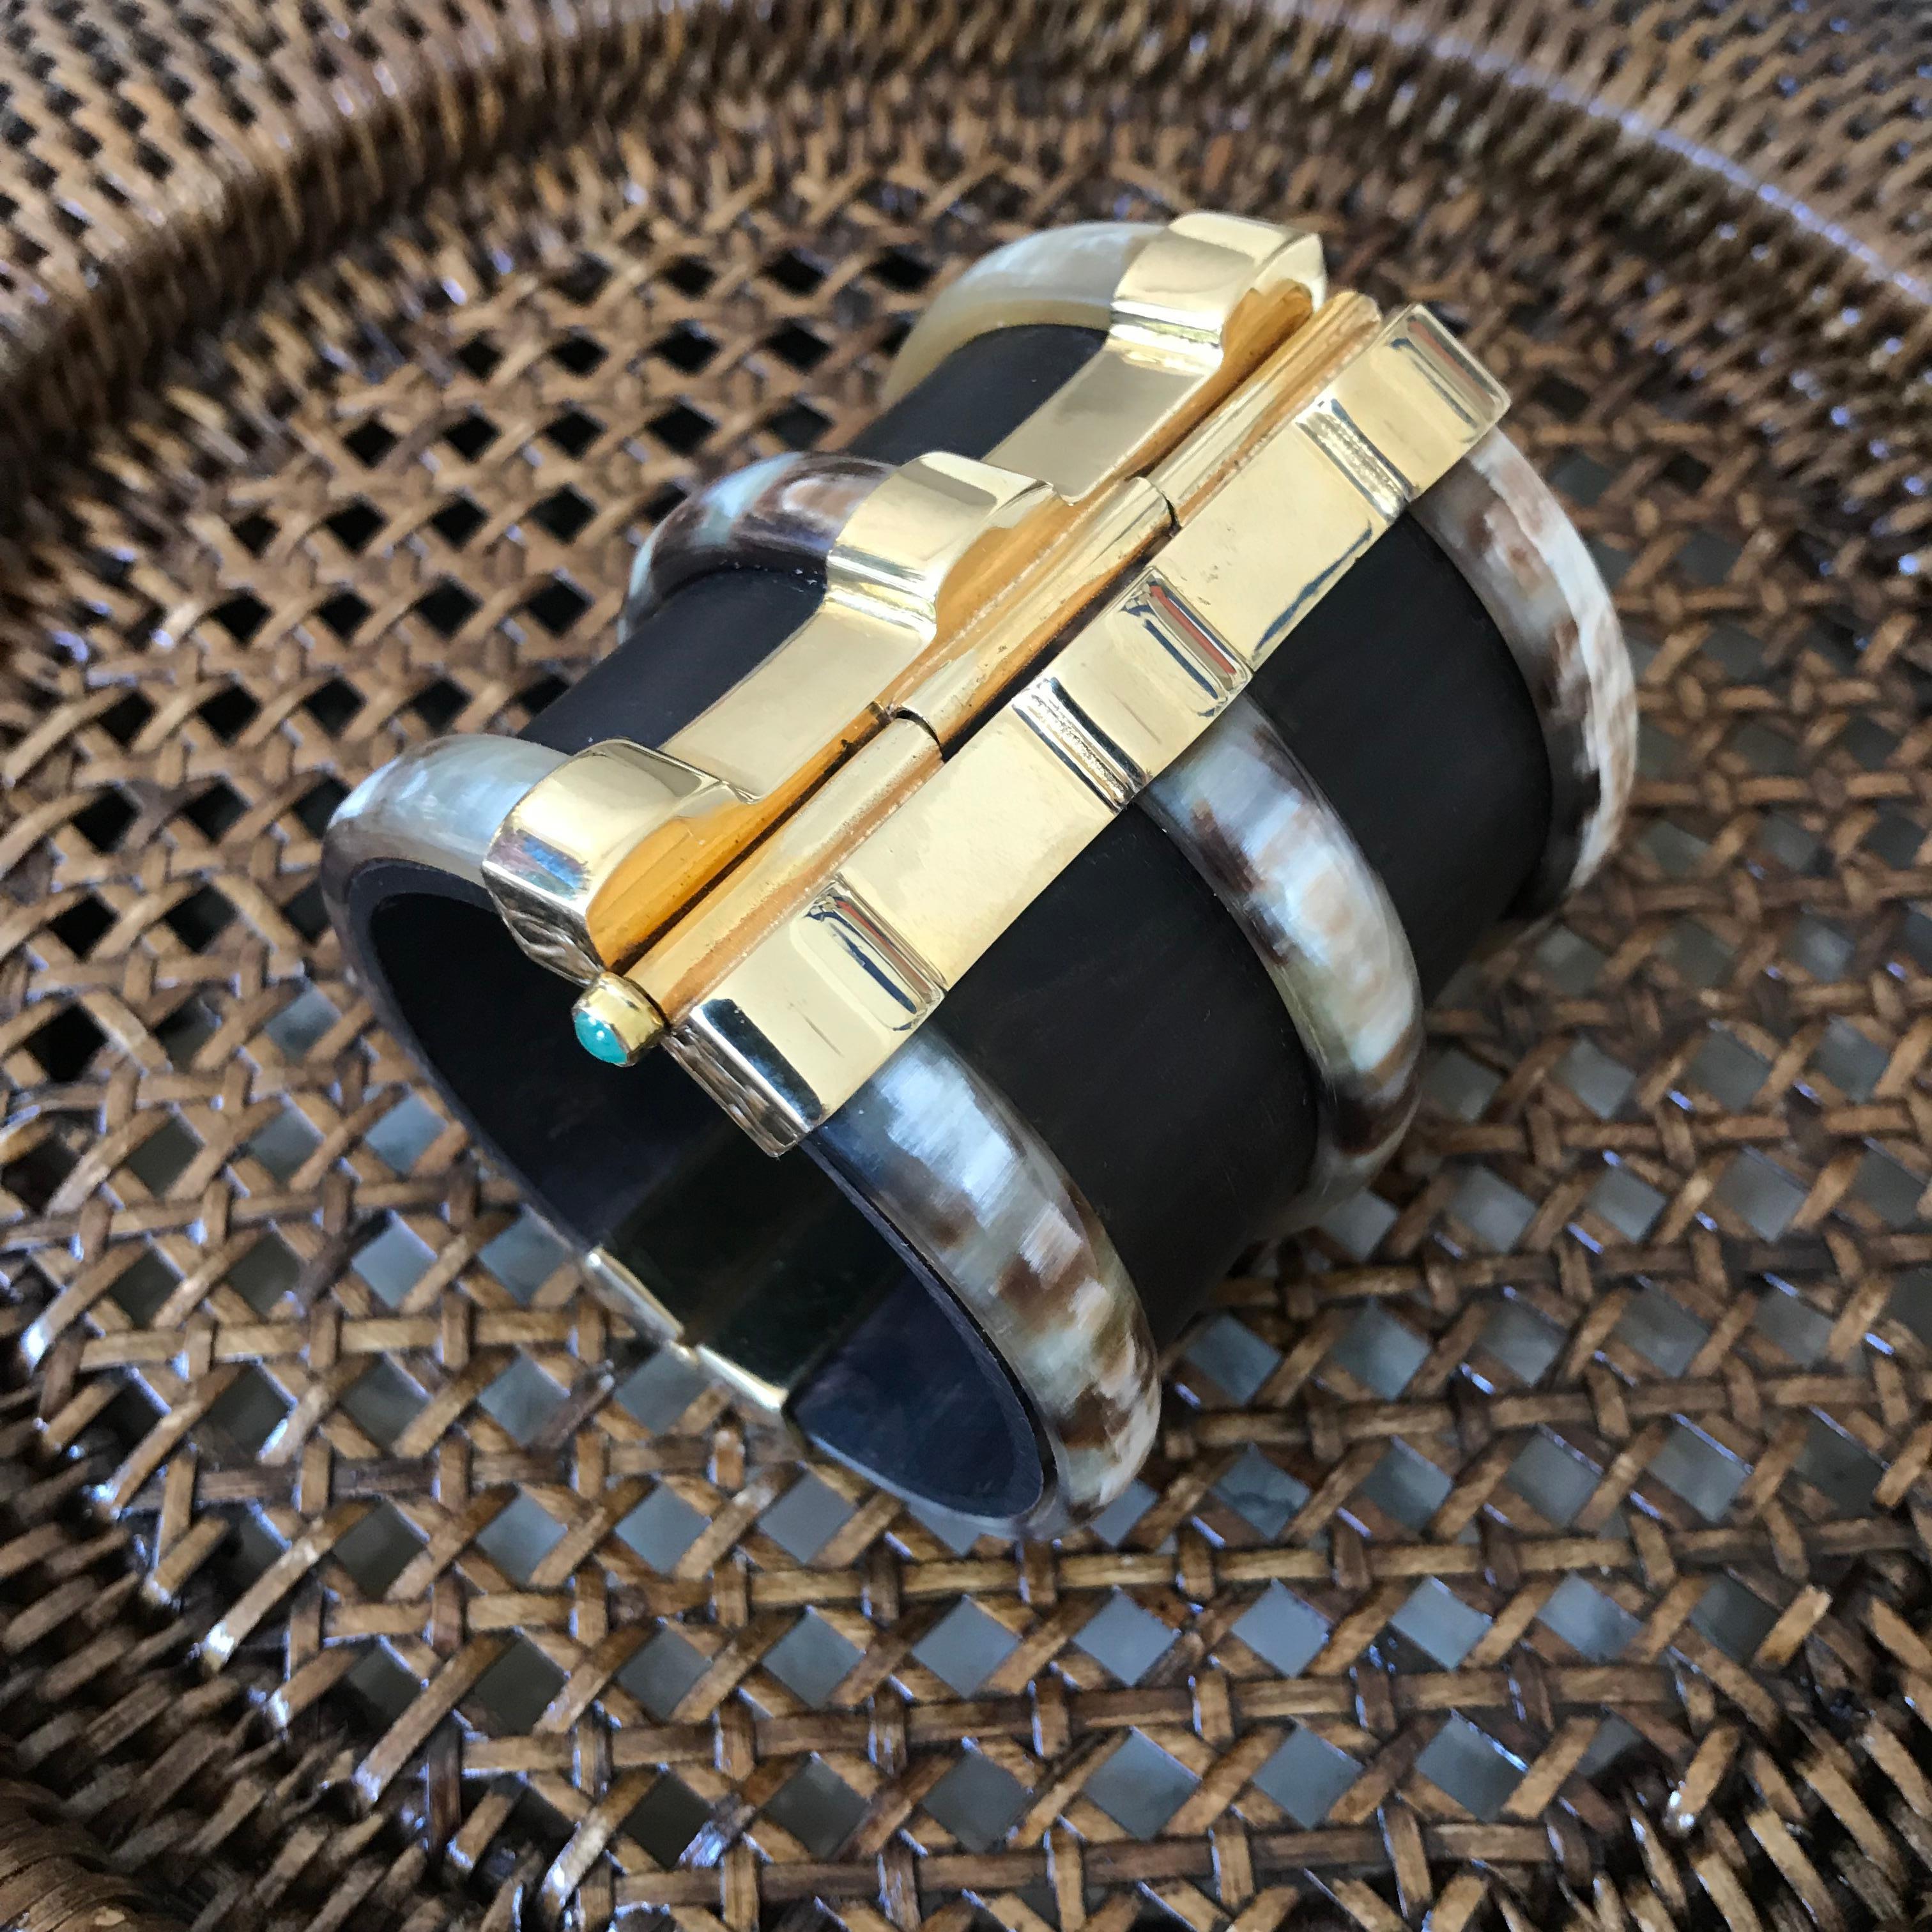 Cuff bracelet crafted by hand from ebony wood and African cow horn. The intricate plate pin-clasp is set with a emerald. Inspired by warrior style cuffs worn by former Vogue editor Diana Vreeland. 

Hand crafted by artisans in Kenya, East Africa and